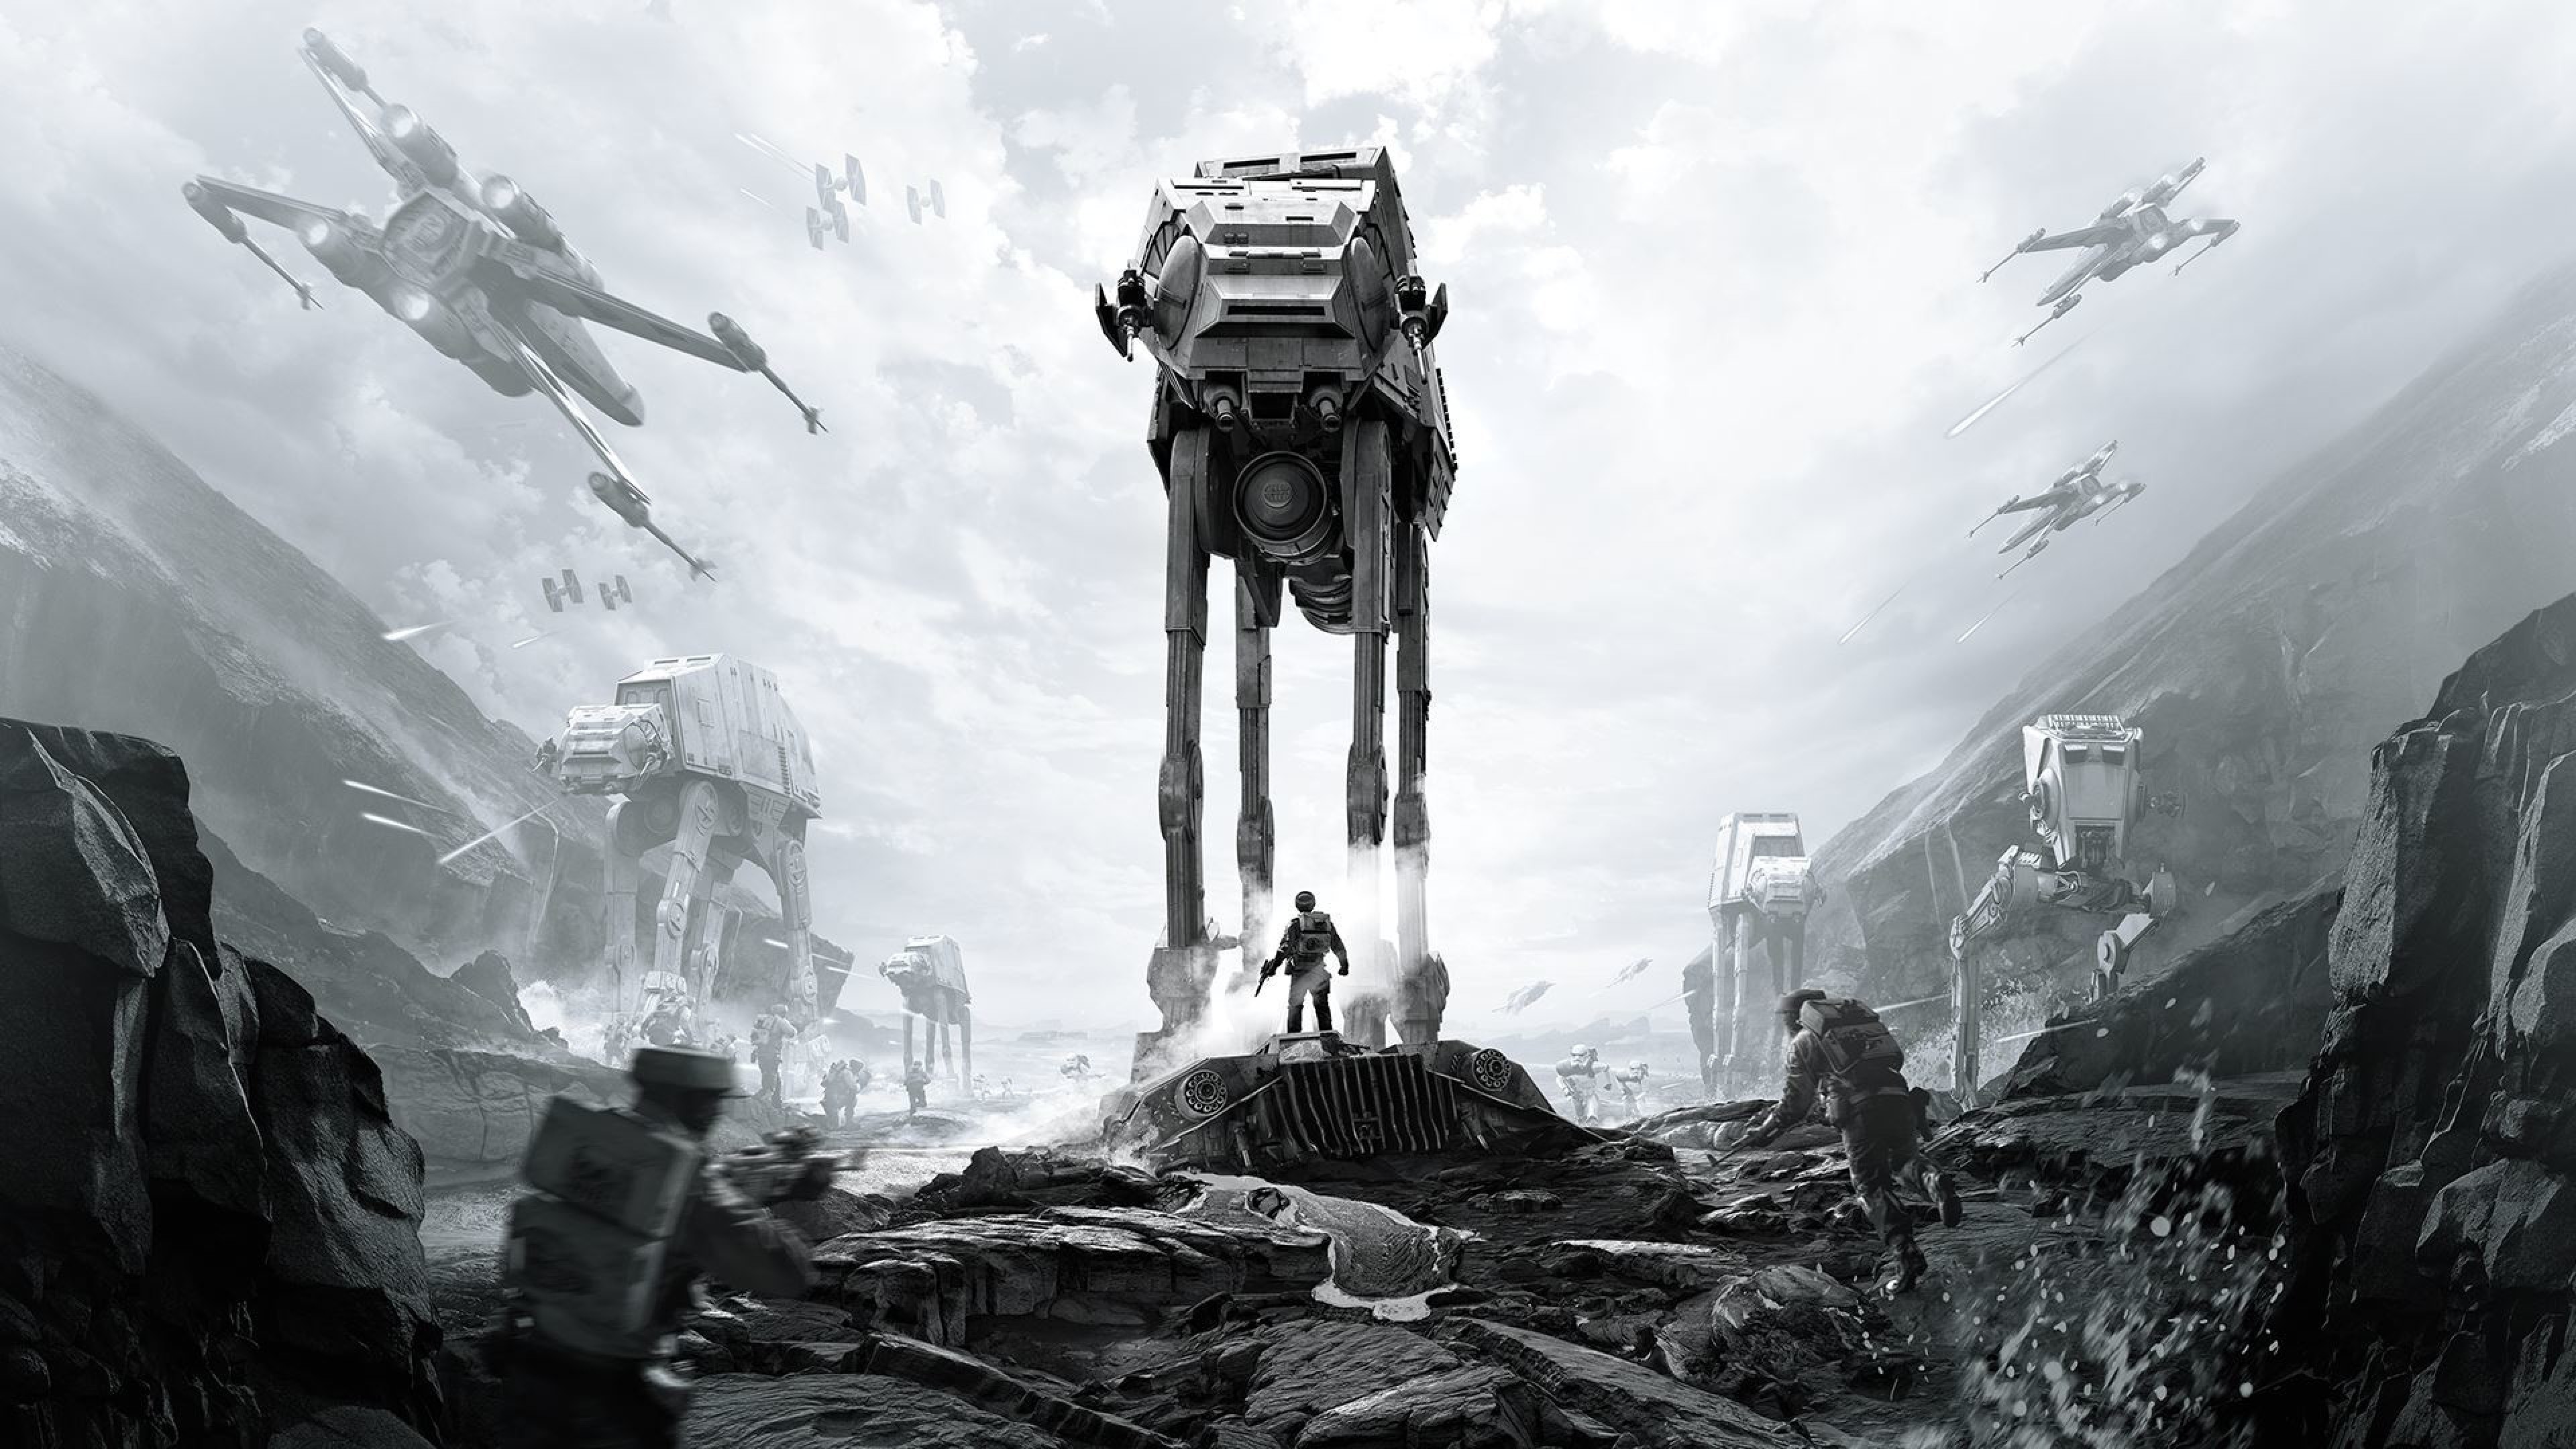 Star Wars 4K wallpaper ·① Download free awesome wallpapers ...